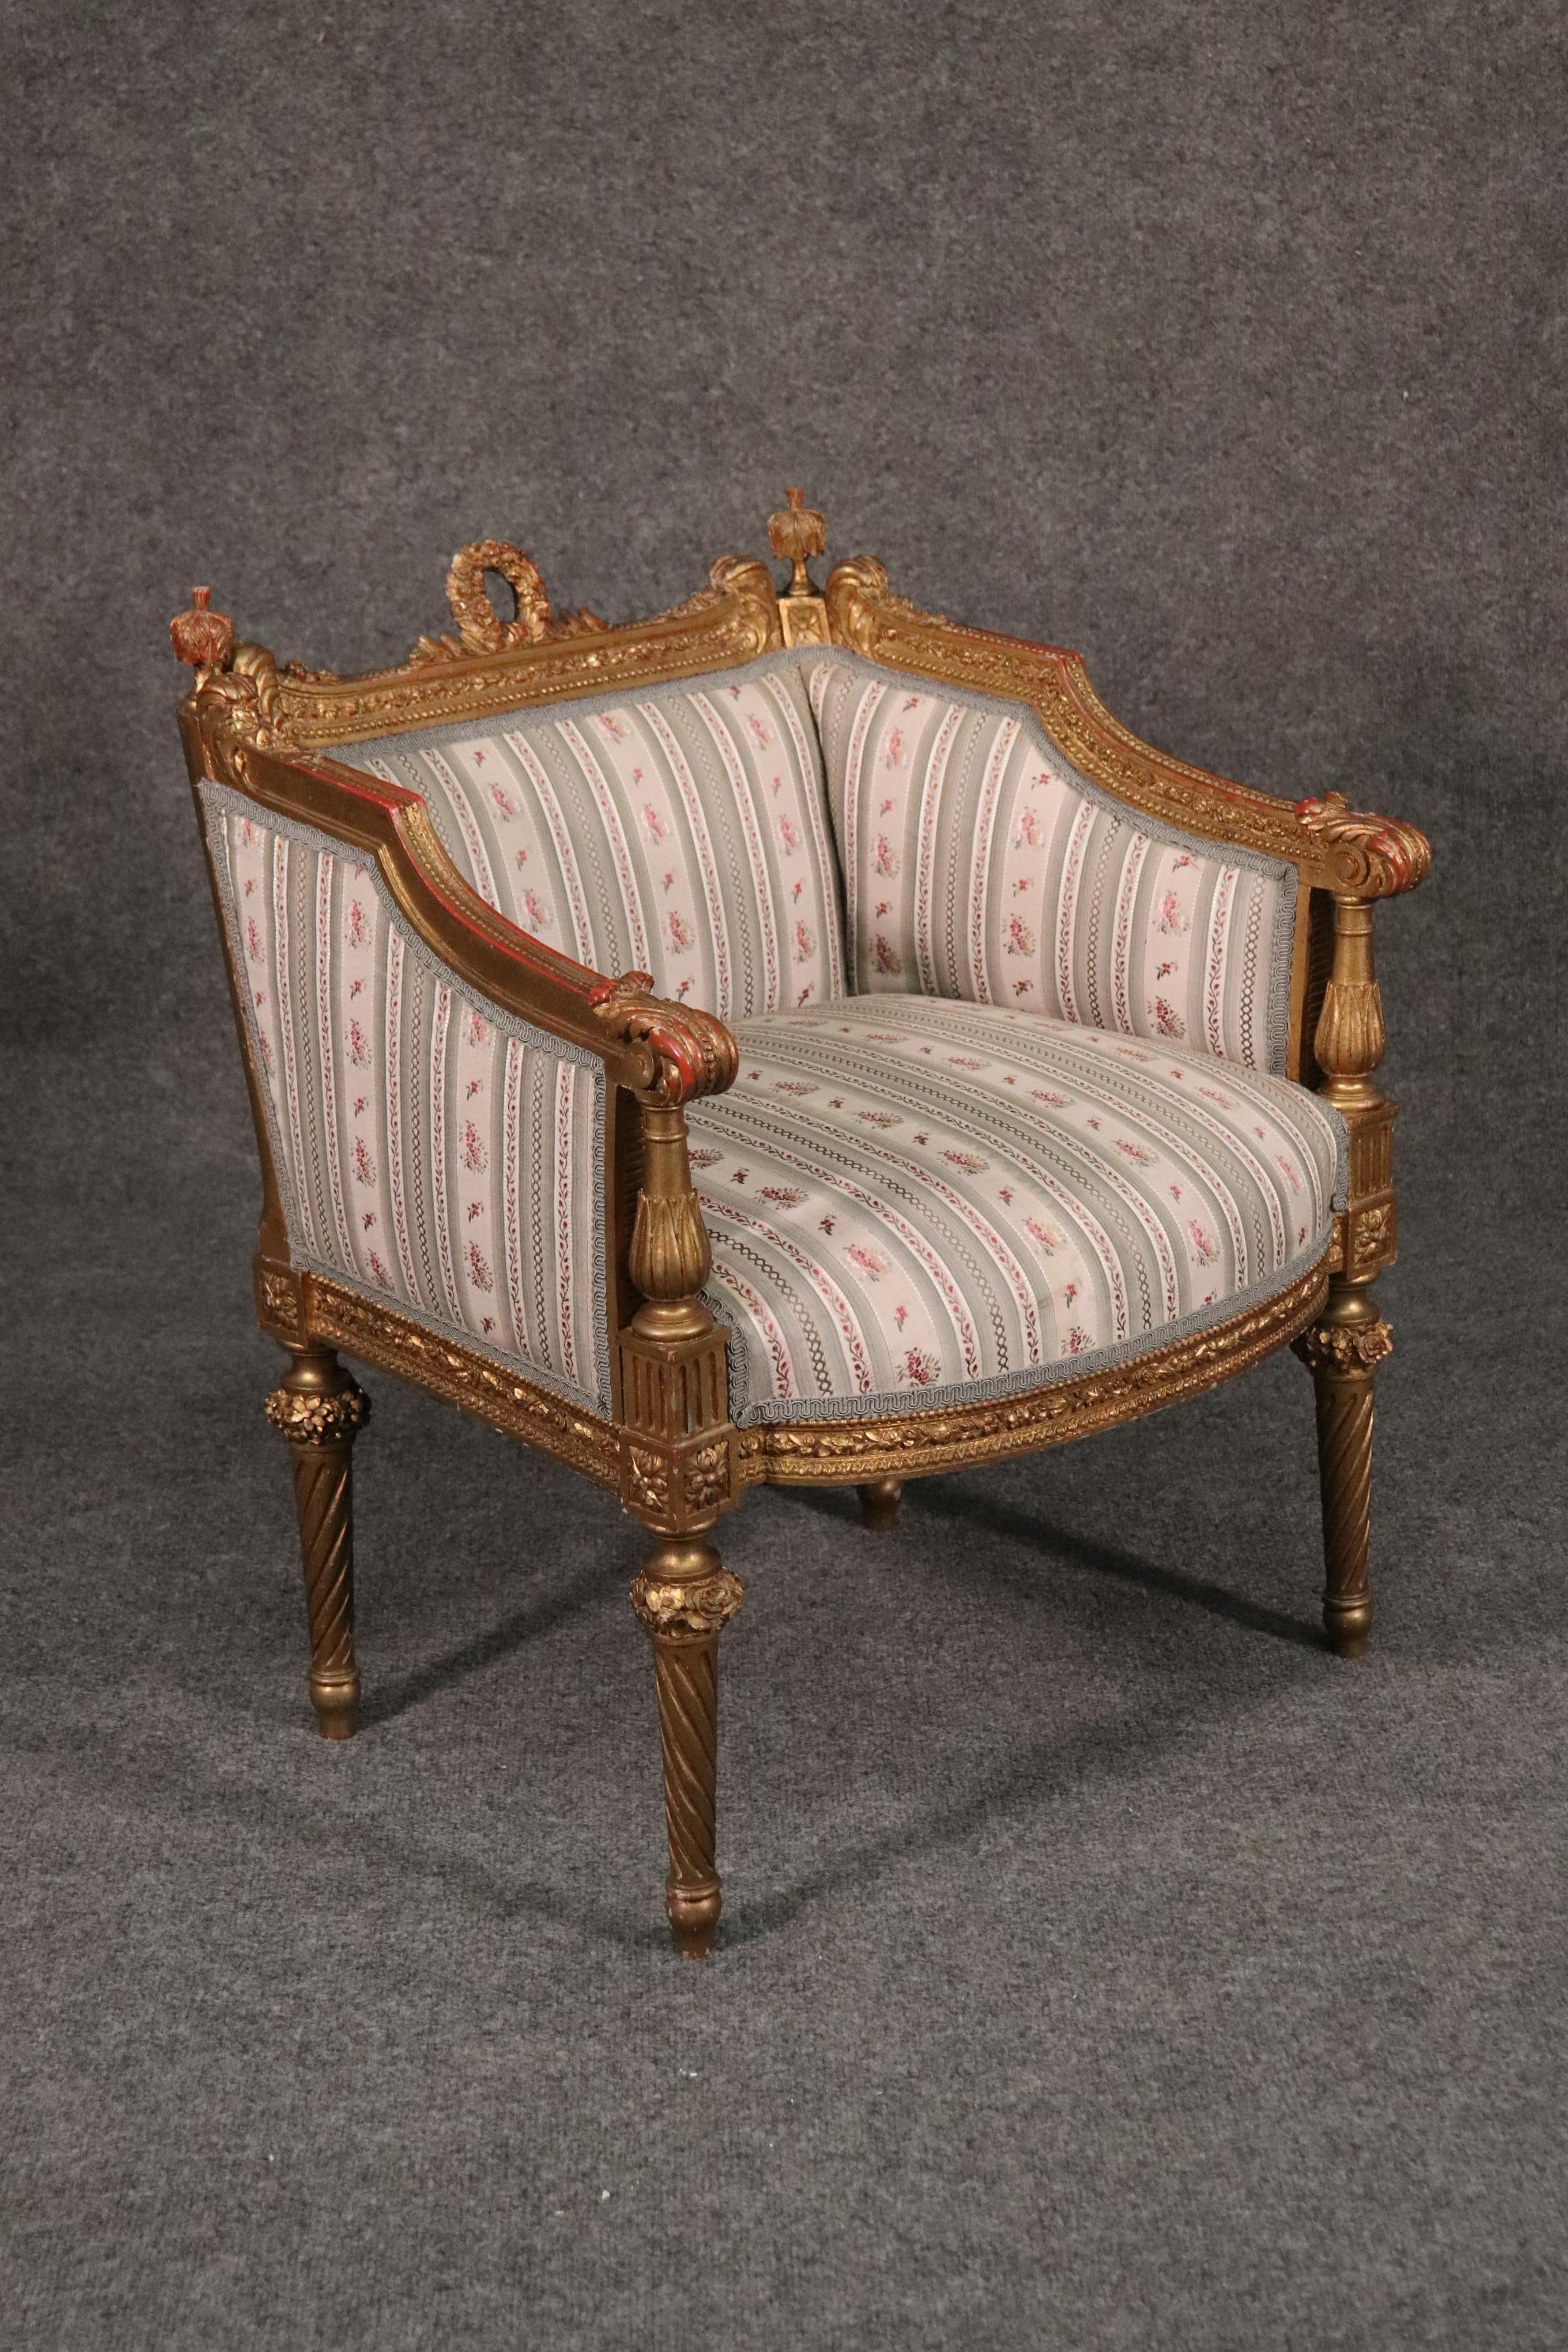 This is a truly gorgeous chair. Gilded over a red clay bole ground, this gorgeous chair is in good condition and feature meticulously carved details and a beautiful design. The chair dates to the 1890s and measures 27 tall x 24 wide x 21 deep. The